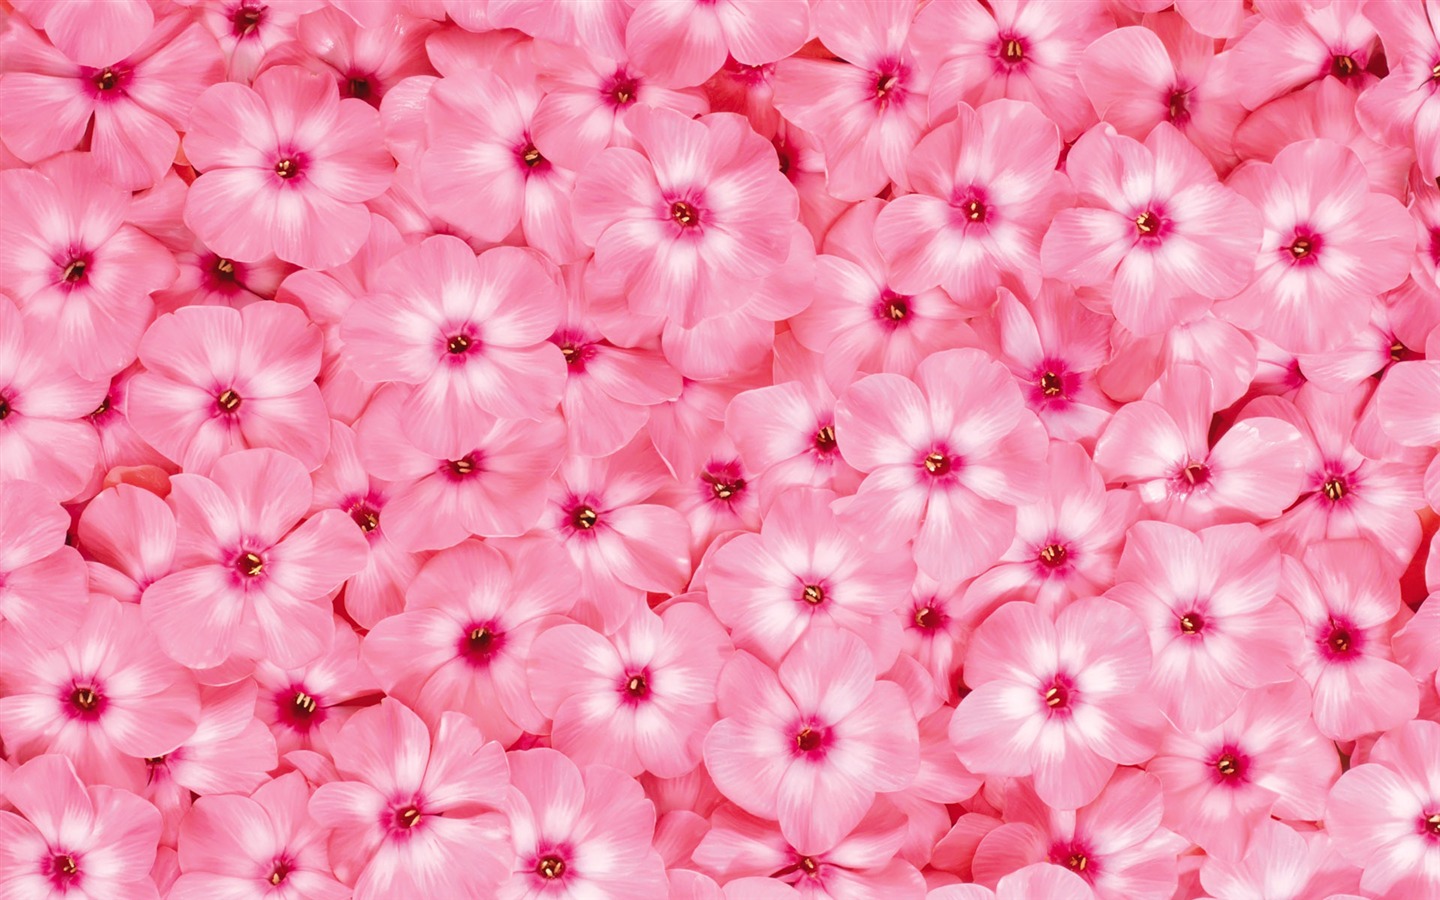 Surrounded by stunning flowers wallpaper #14 - 1440x900